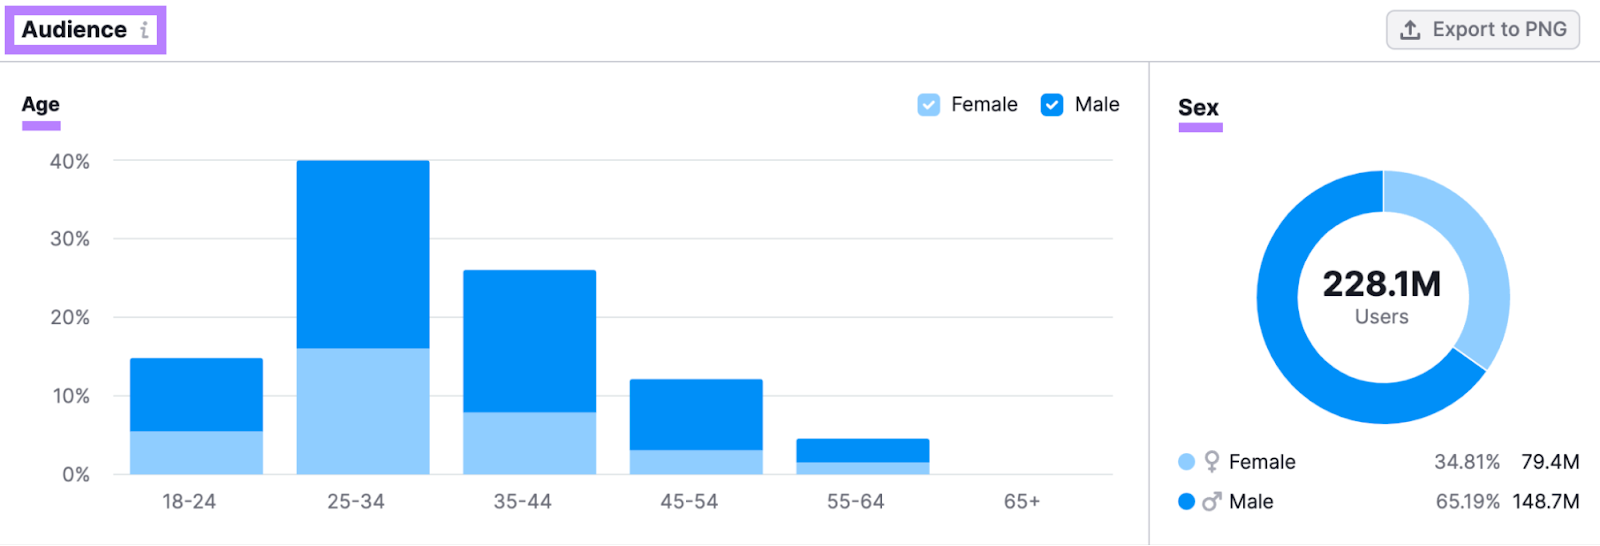 "Audience" section in One2Target tool shows how audience is distributed across age and gender